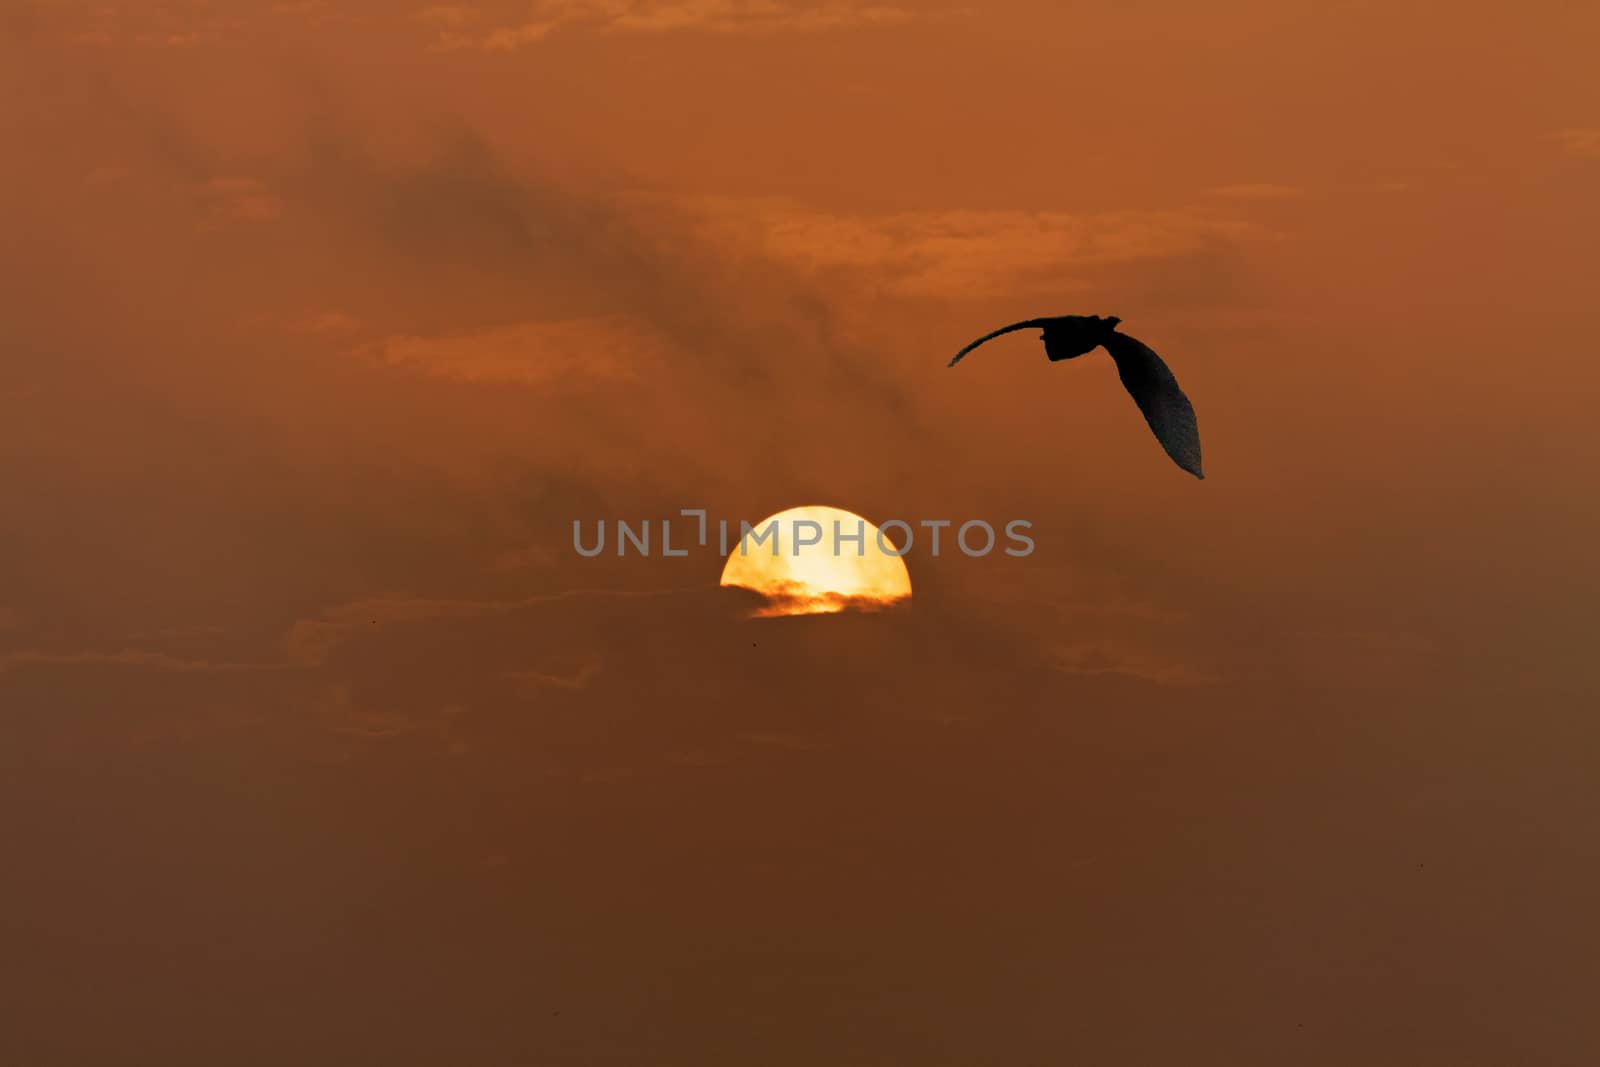 Dusty Pollution causes a Red Dawn and the silhoutte of a soaring bird into the sun results in a dramatic moody landscape